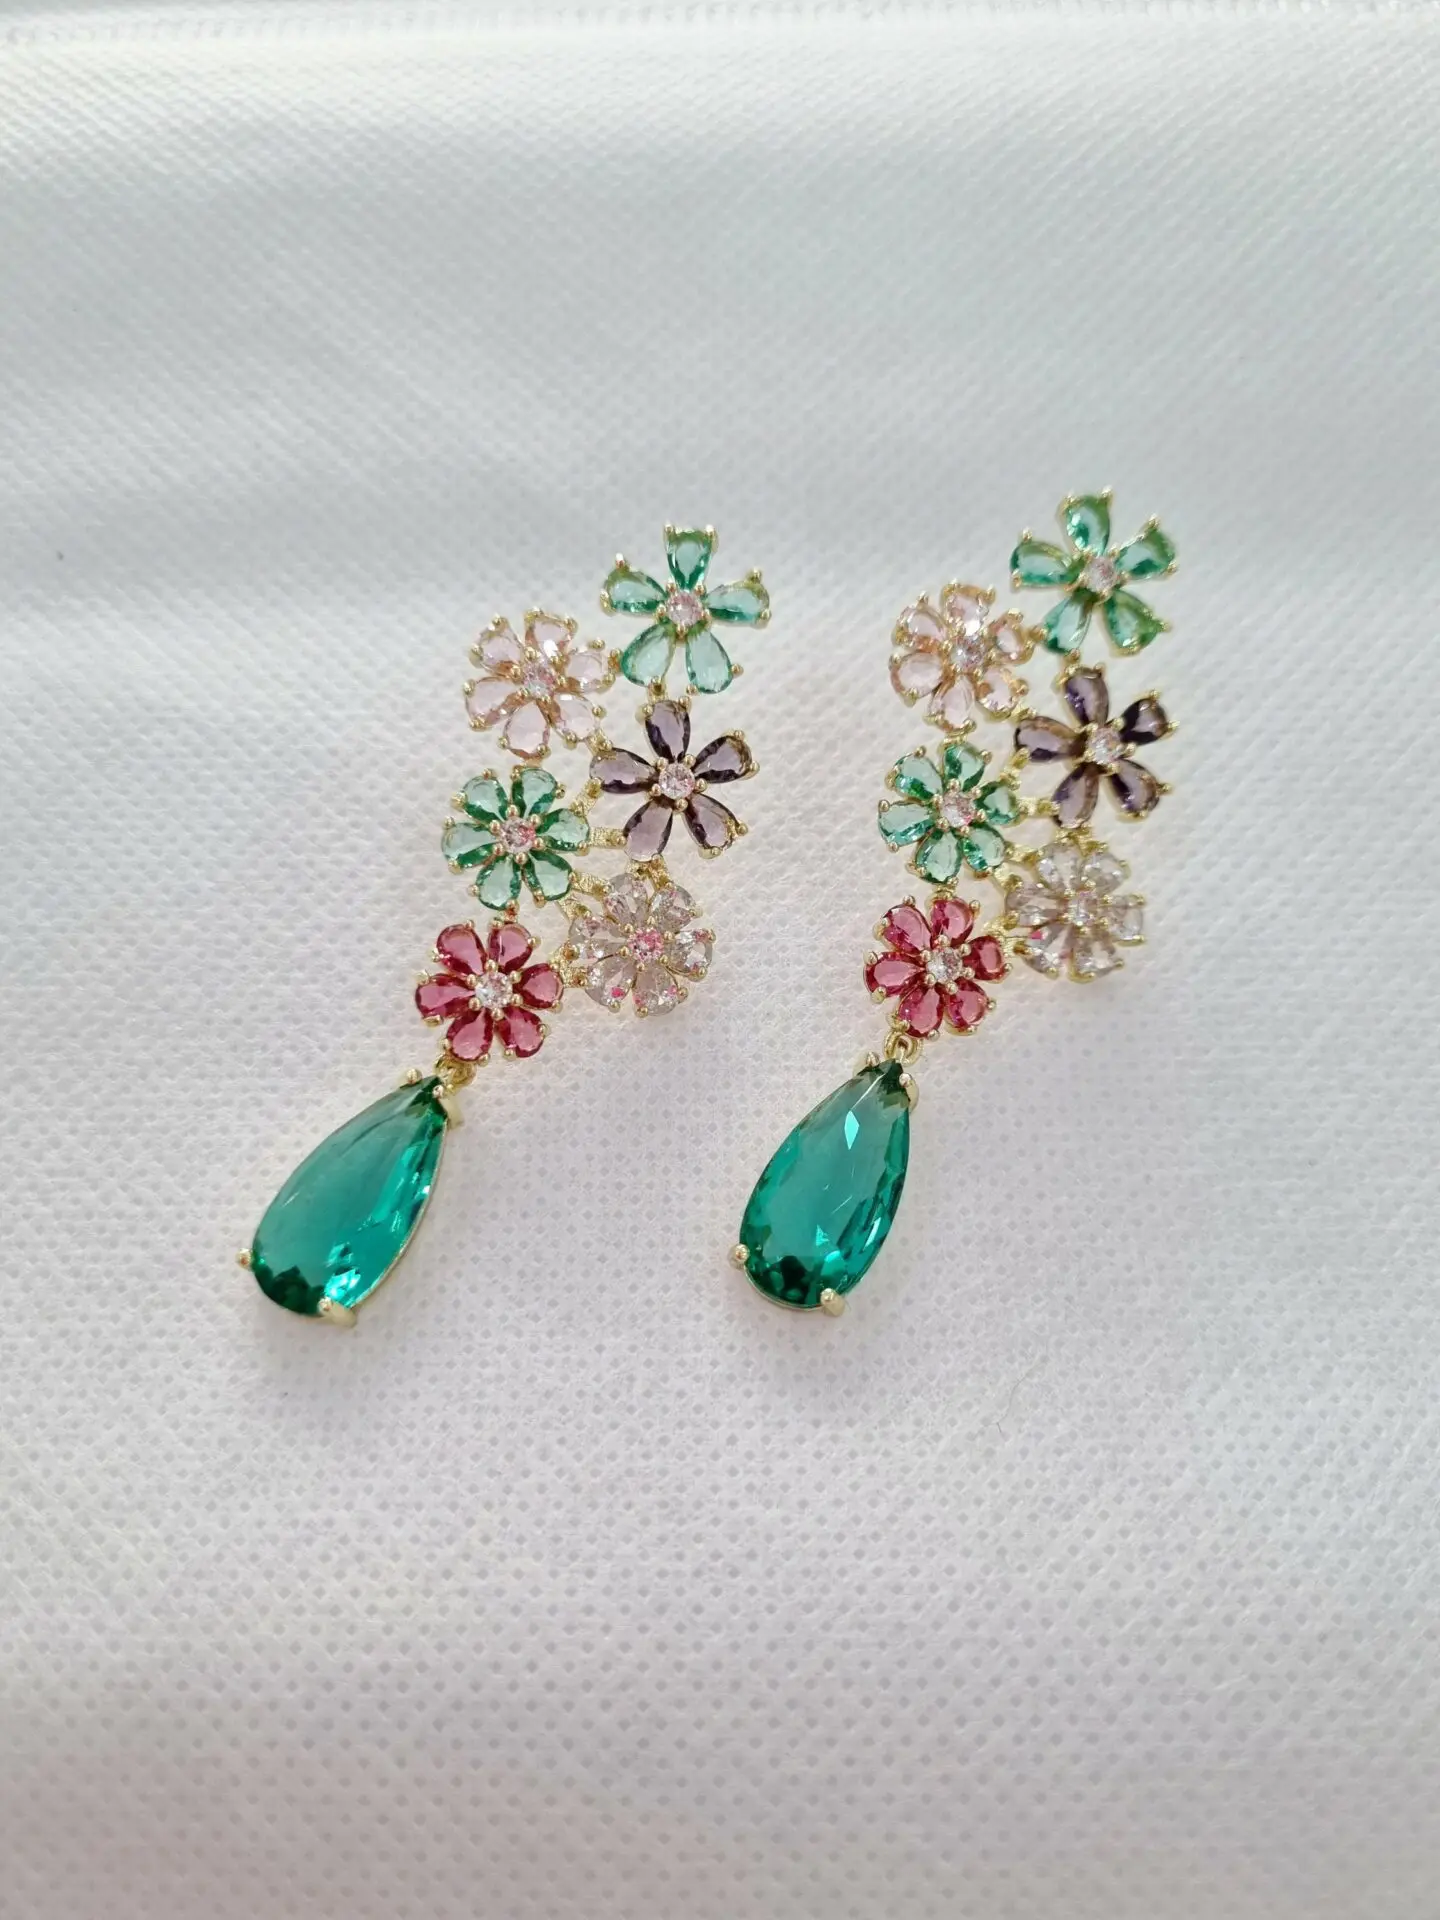 Earrings made with multicolored flowers and crystalloid drop. Length 6cm Weight 6.9g